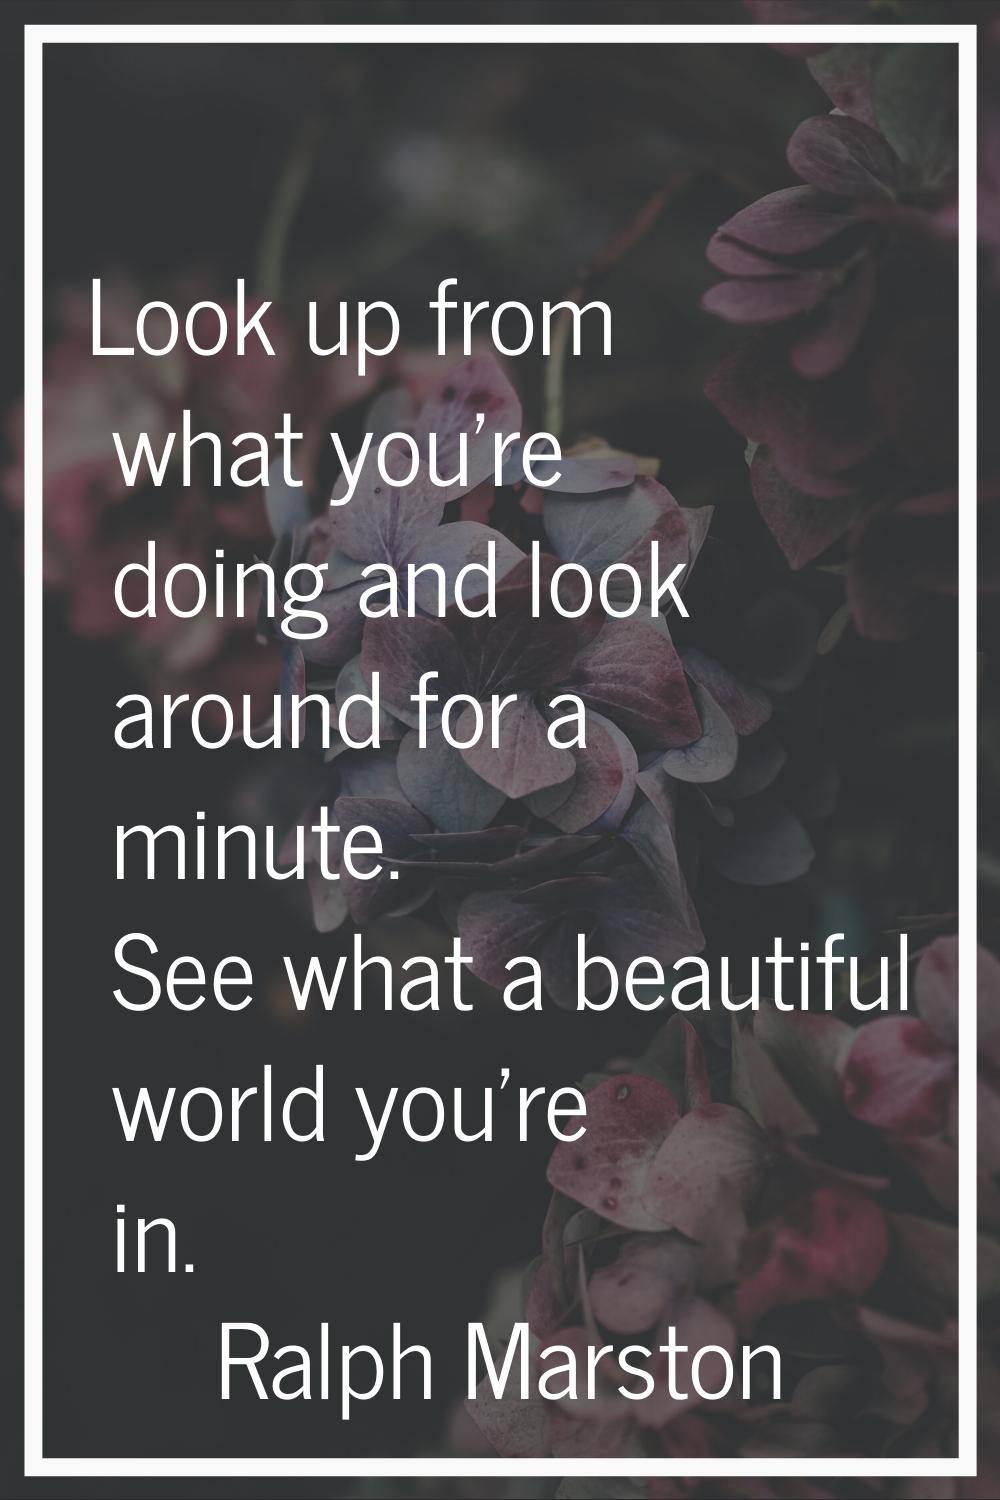 Look up from what you're doing and look around for a minute. See what a beautiful world you're in.